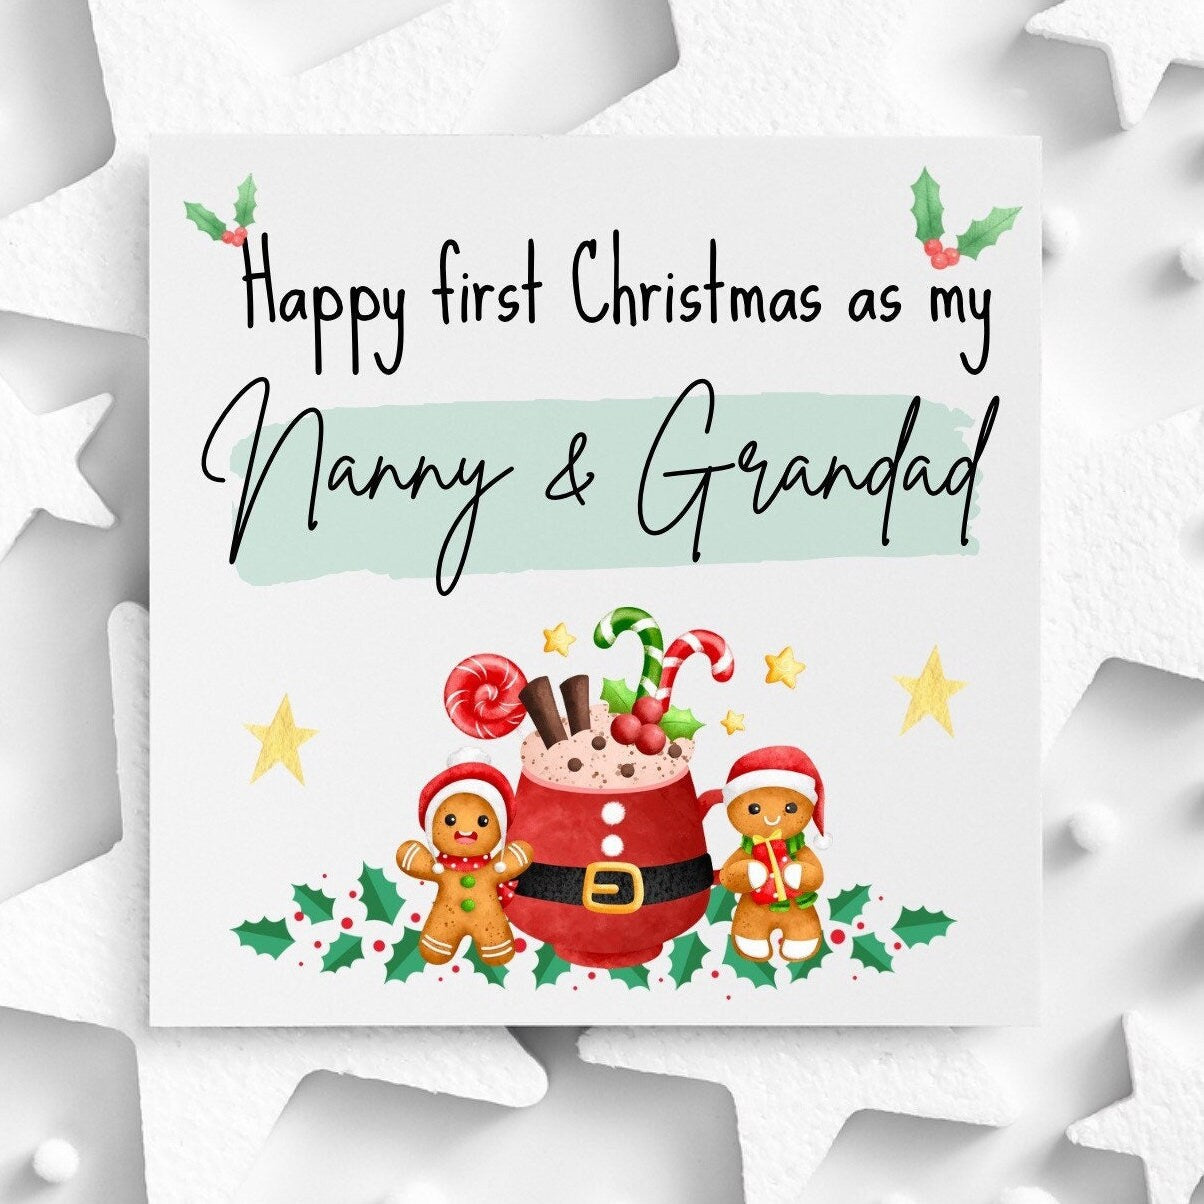 Happy first Christmas as my nanny and grandad greeting card, baby first Christmas card to send to grandparents. Nan, granny, grandpa, Nona